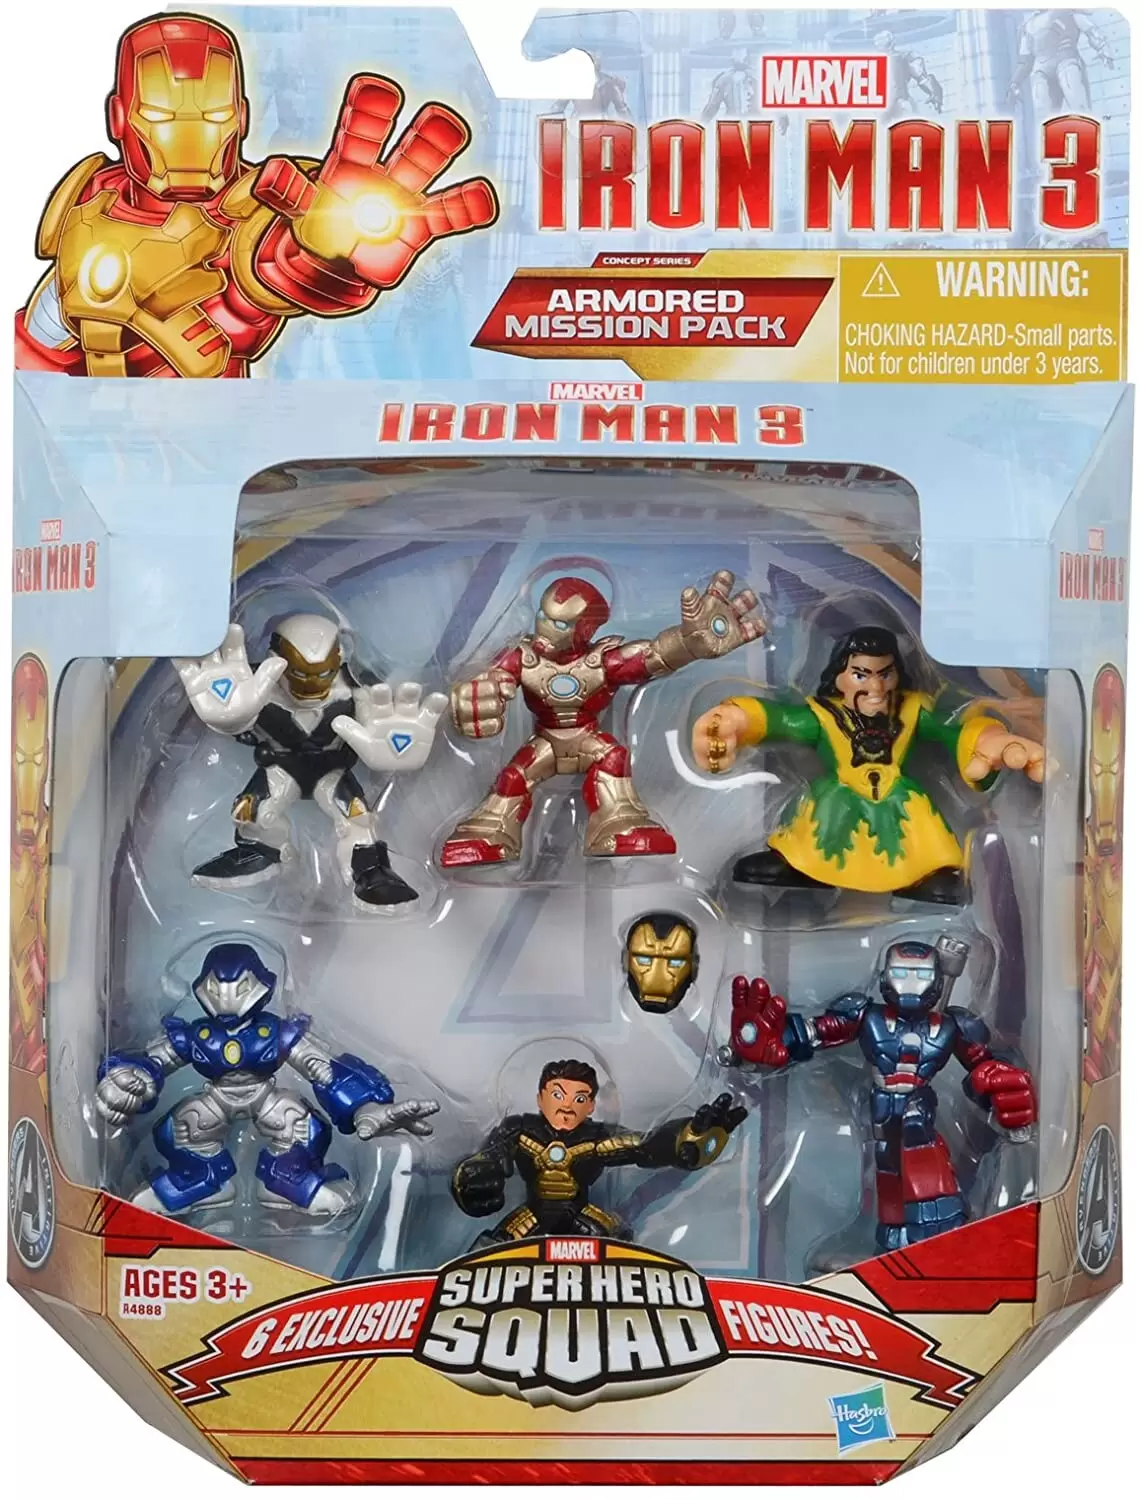 Marvel Super Hero Squad Action Figures - Iron Man 3 - Armored Mission Pack